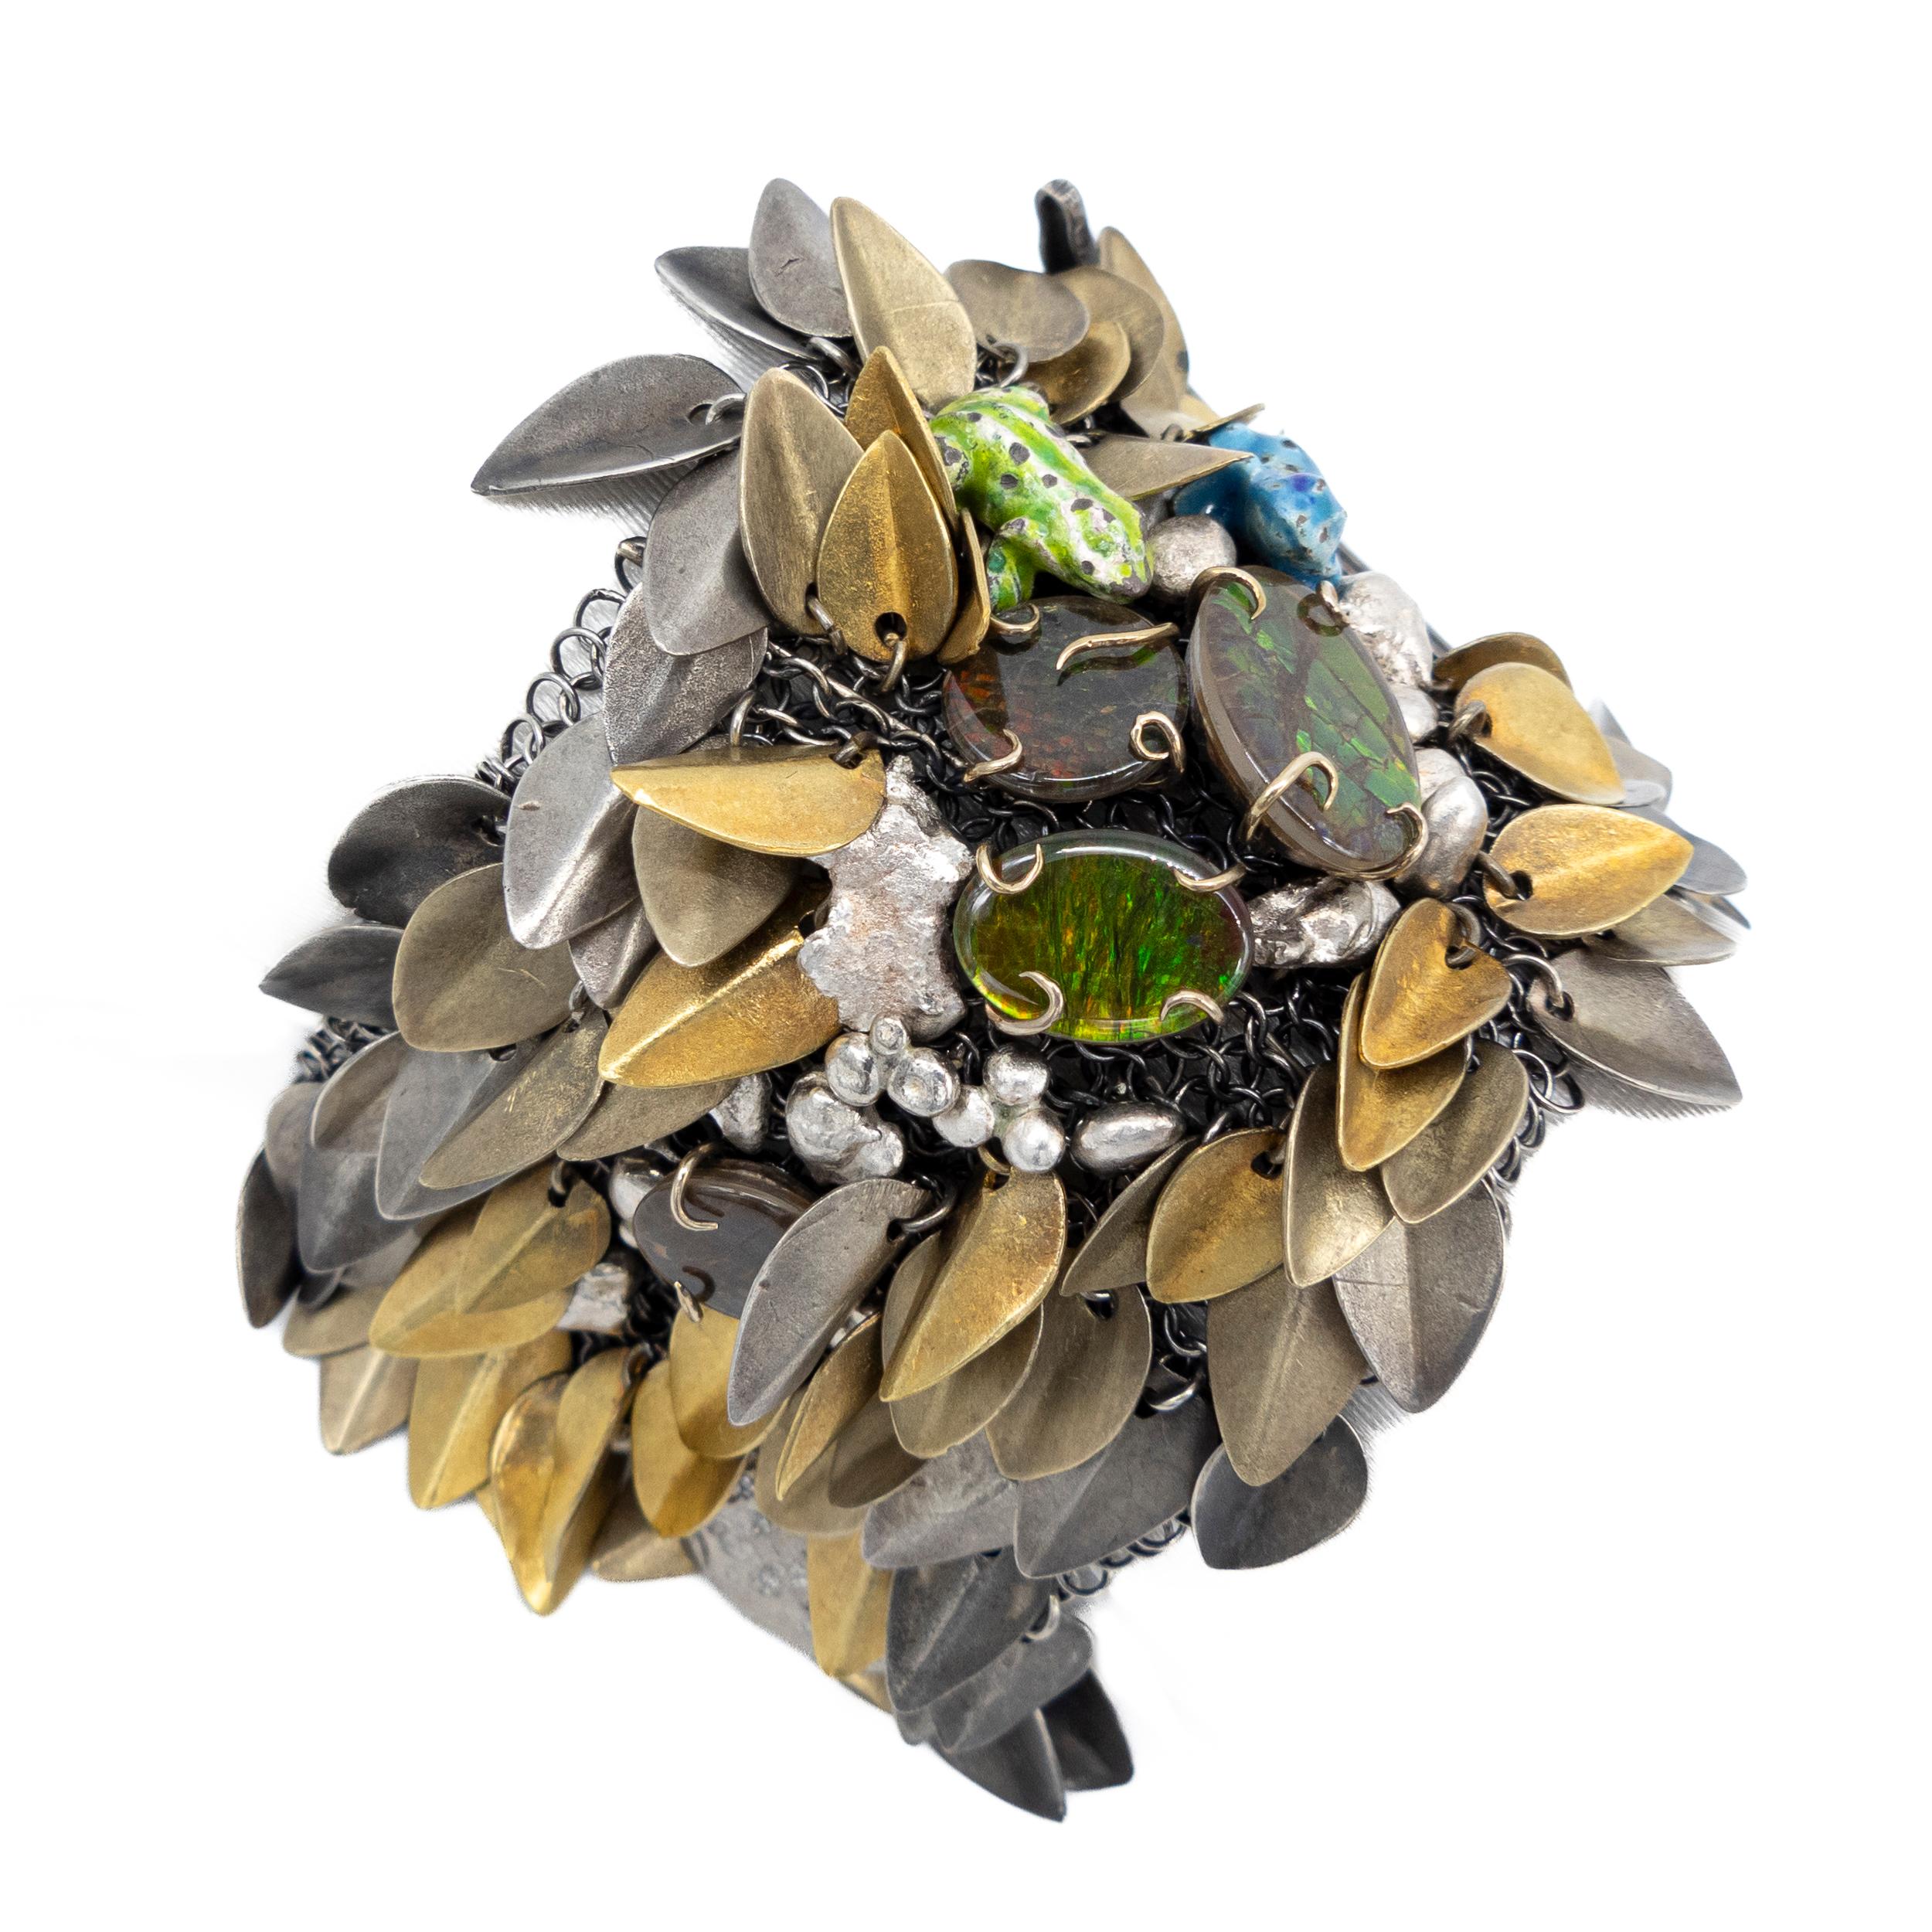 21st Century Bracelet Silver Mesh 18k yellow gold Ammolite Diamonds Frogs

One of the key features of our work is to portray stories, fables, or tales through our jewelry pieces.

In this bracelet, you can witness the Enchanted Forest come to life,